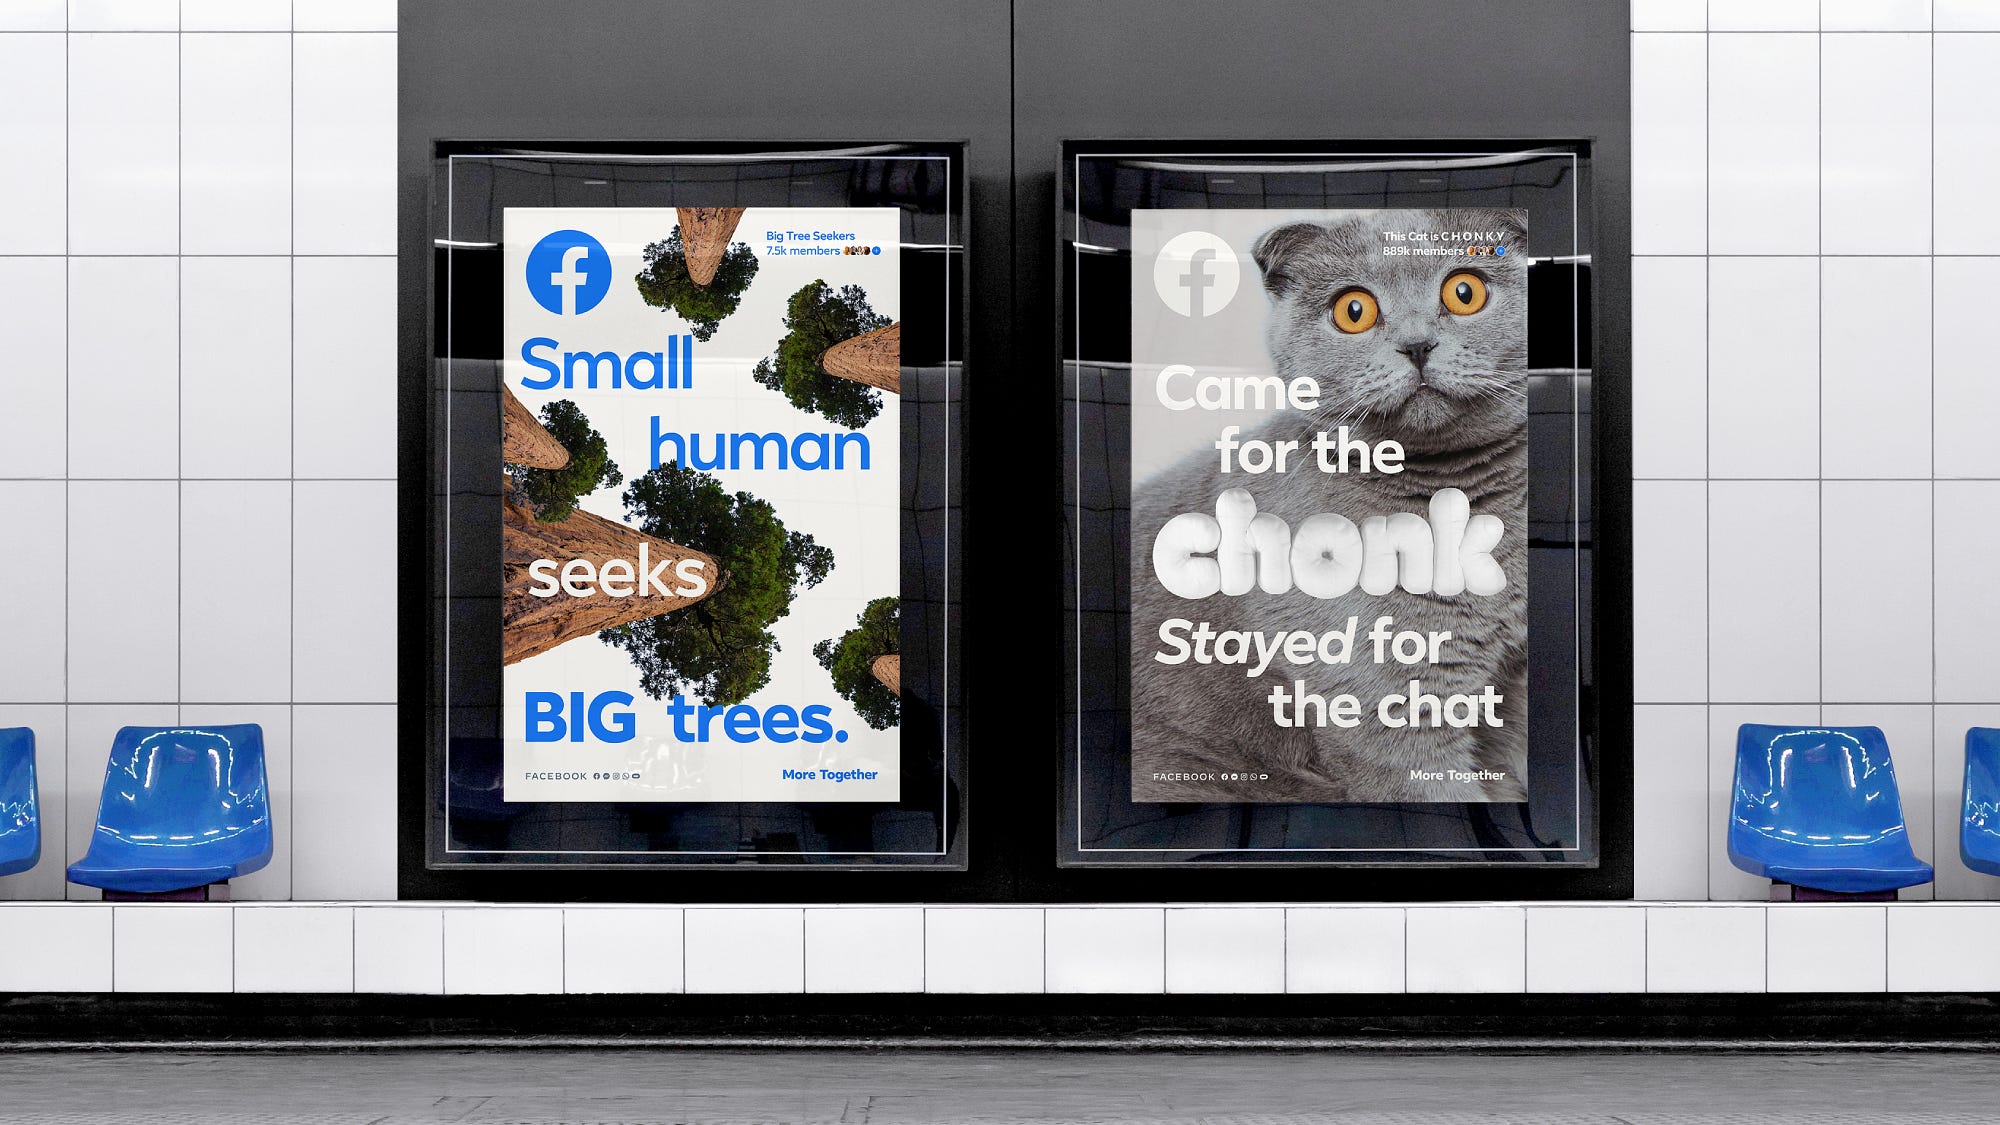 Two advertisements side-by-side in a subway station show the Facebook Sans font in different styles.